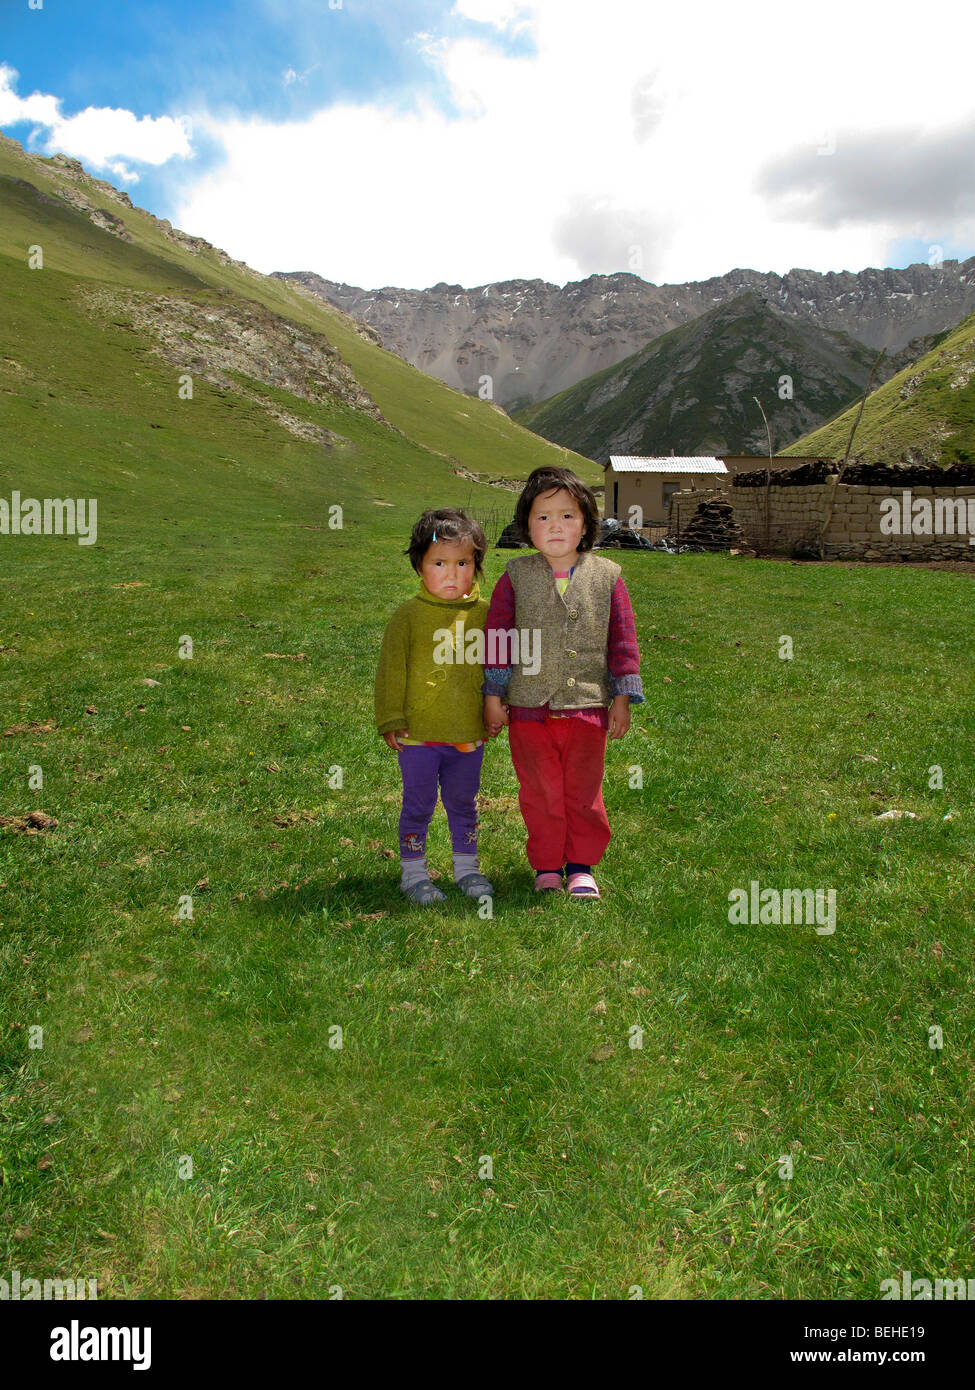 two small girls standing outside their summer dwelling near Tash Rabat, in the Tian Shan mountains, eastern Kyrgyzstan. Stock Photo